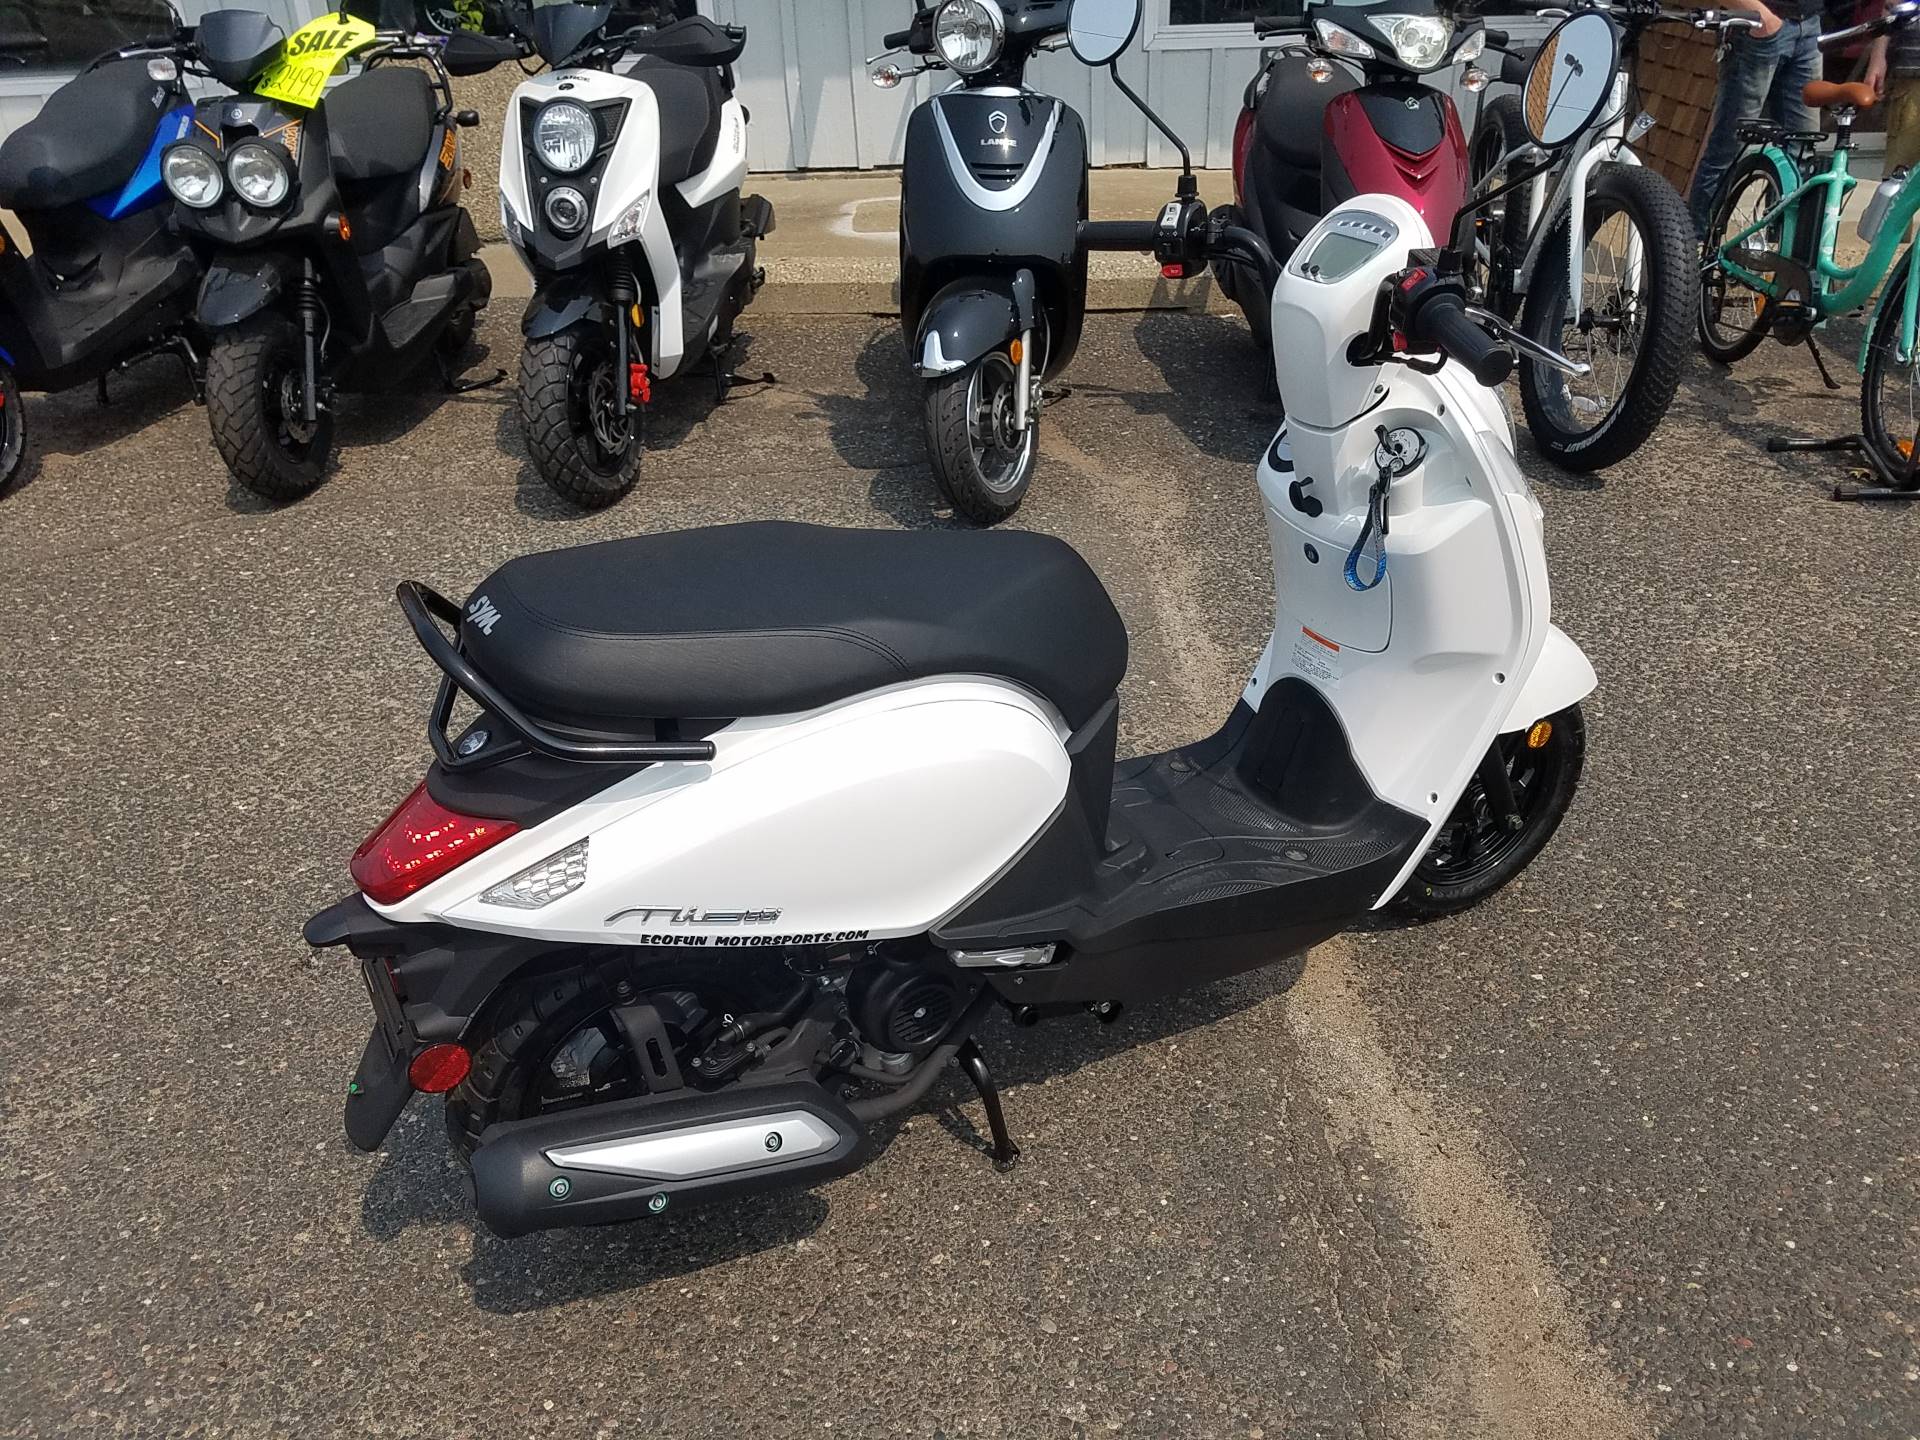 2022 SYM Mio 49cc Scooter in Forest Lake, Minnesota - Photo 7